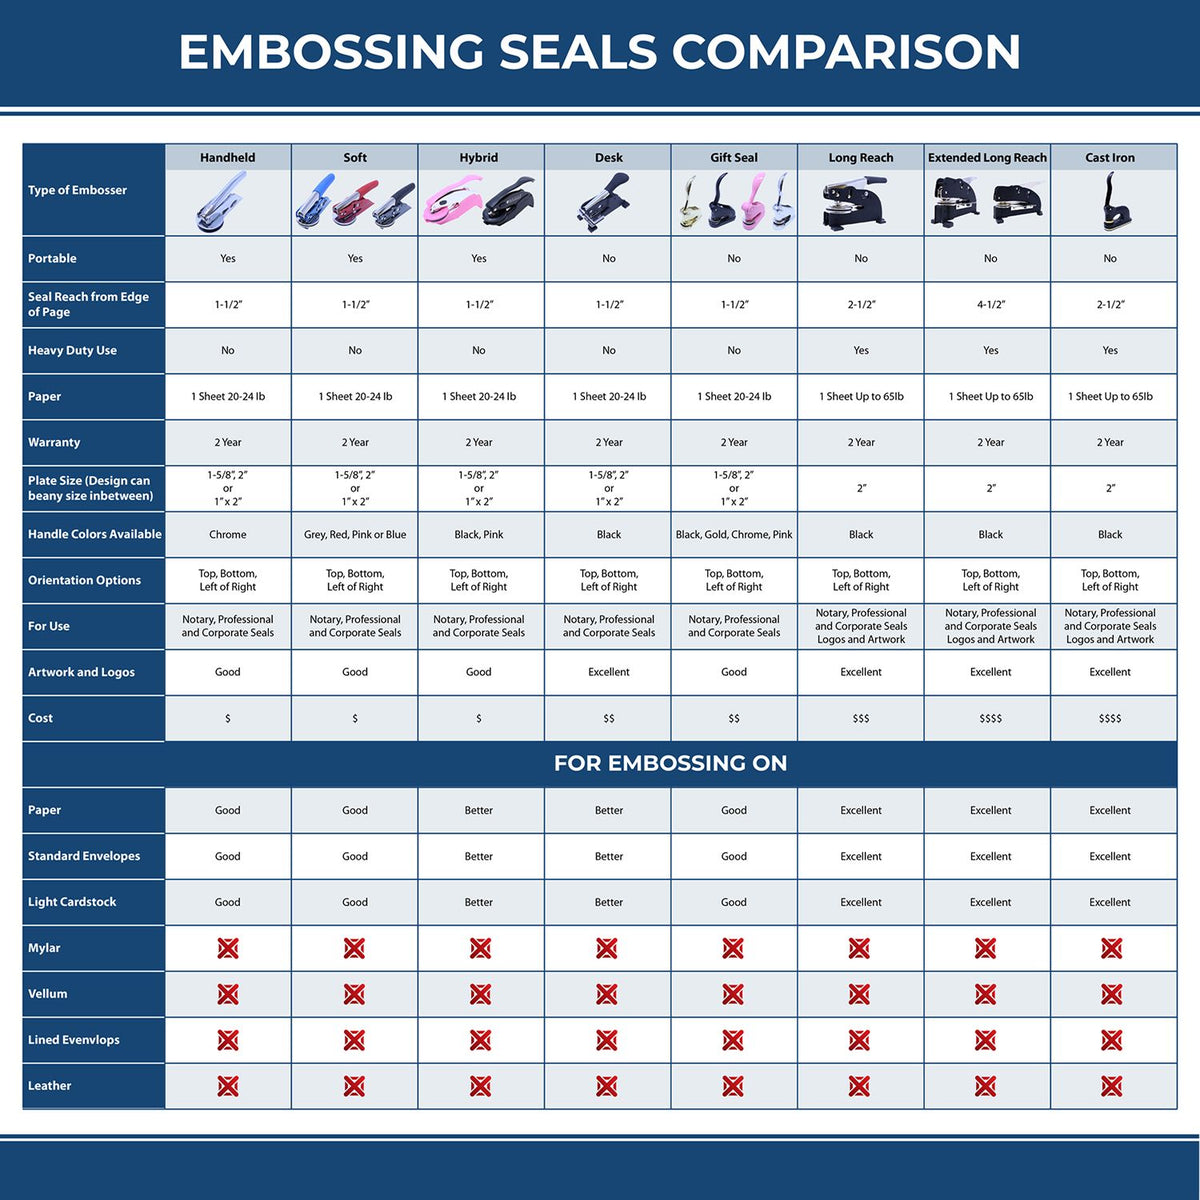 A comparison chart for the different types of mount models available for the Missouri Engineer Desk Seal.